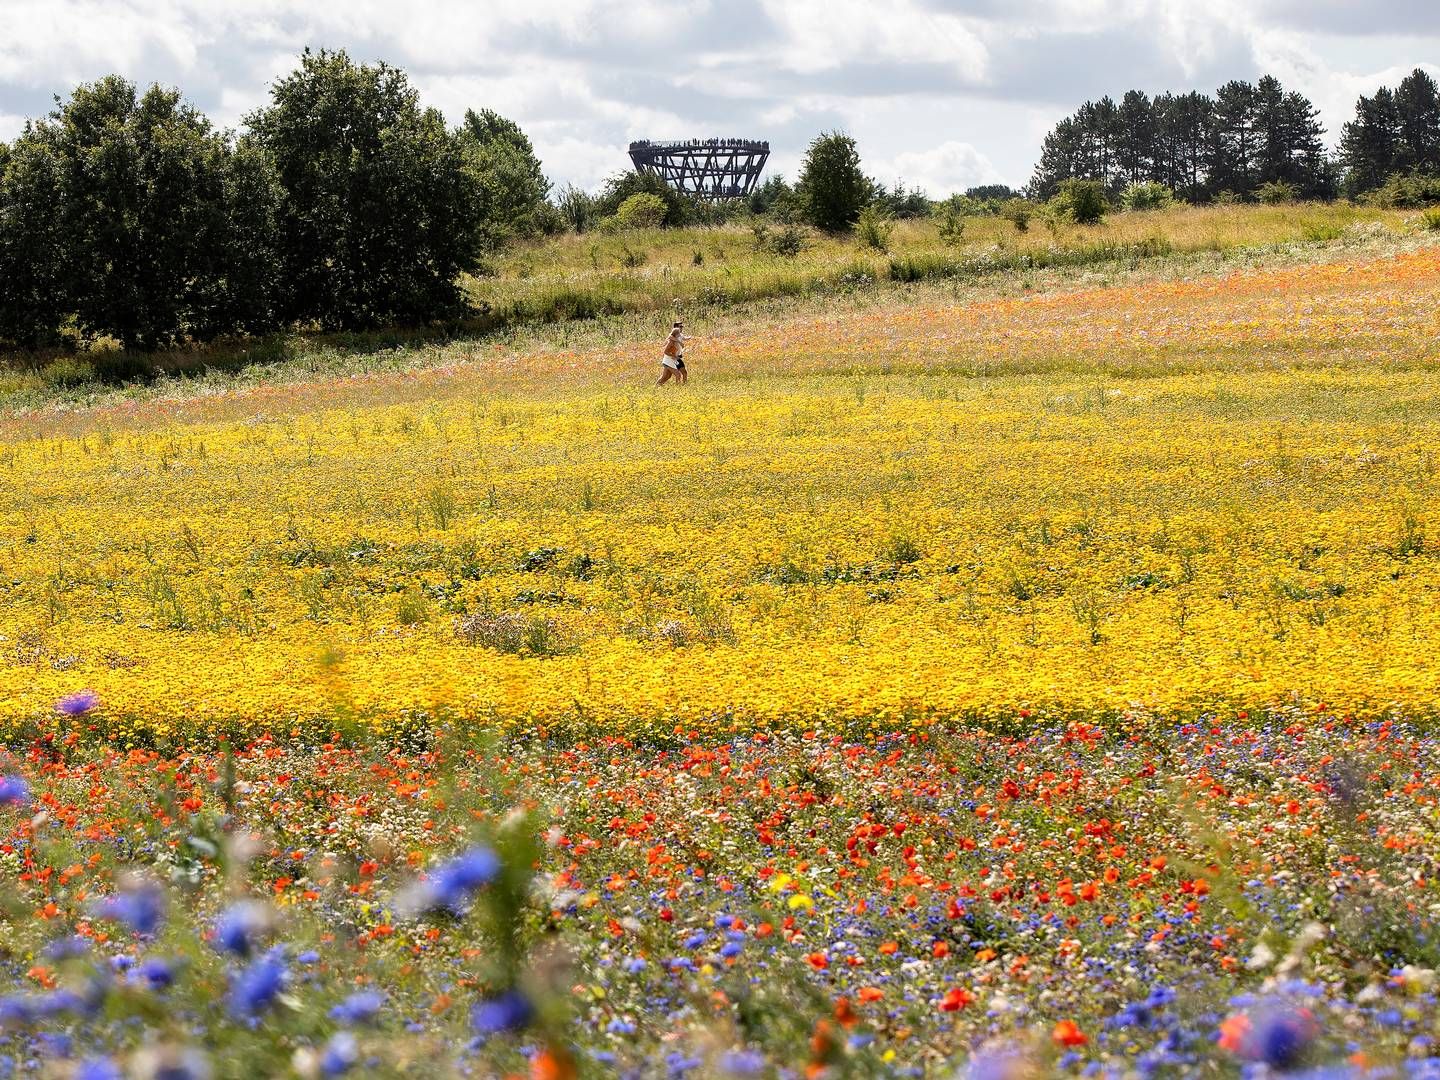 Biodiversity is a major focus area for many pension funds. Flower fields, like the one shown here near Danish town Haslev in Denmark can create more biodiversity, wild nature and allow bees, insects and butterflies to feed. | Photo: Finn Frandsen/Ritzau Scanpix